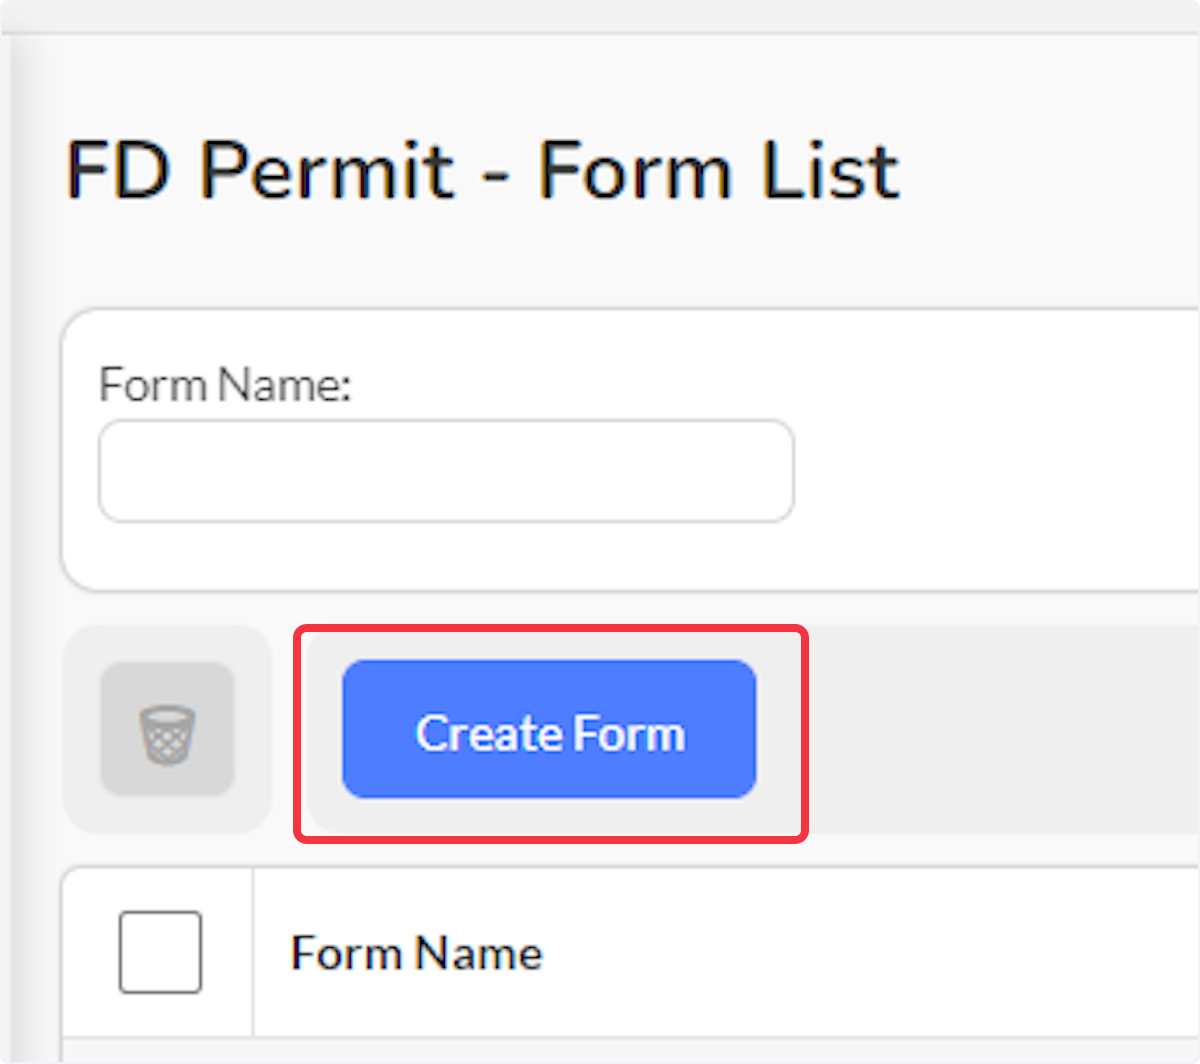 Click Create Form to create a new Permit Form.